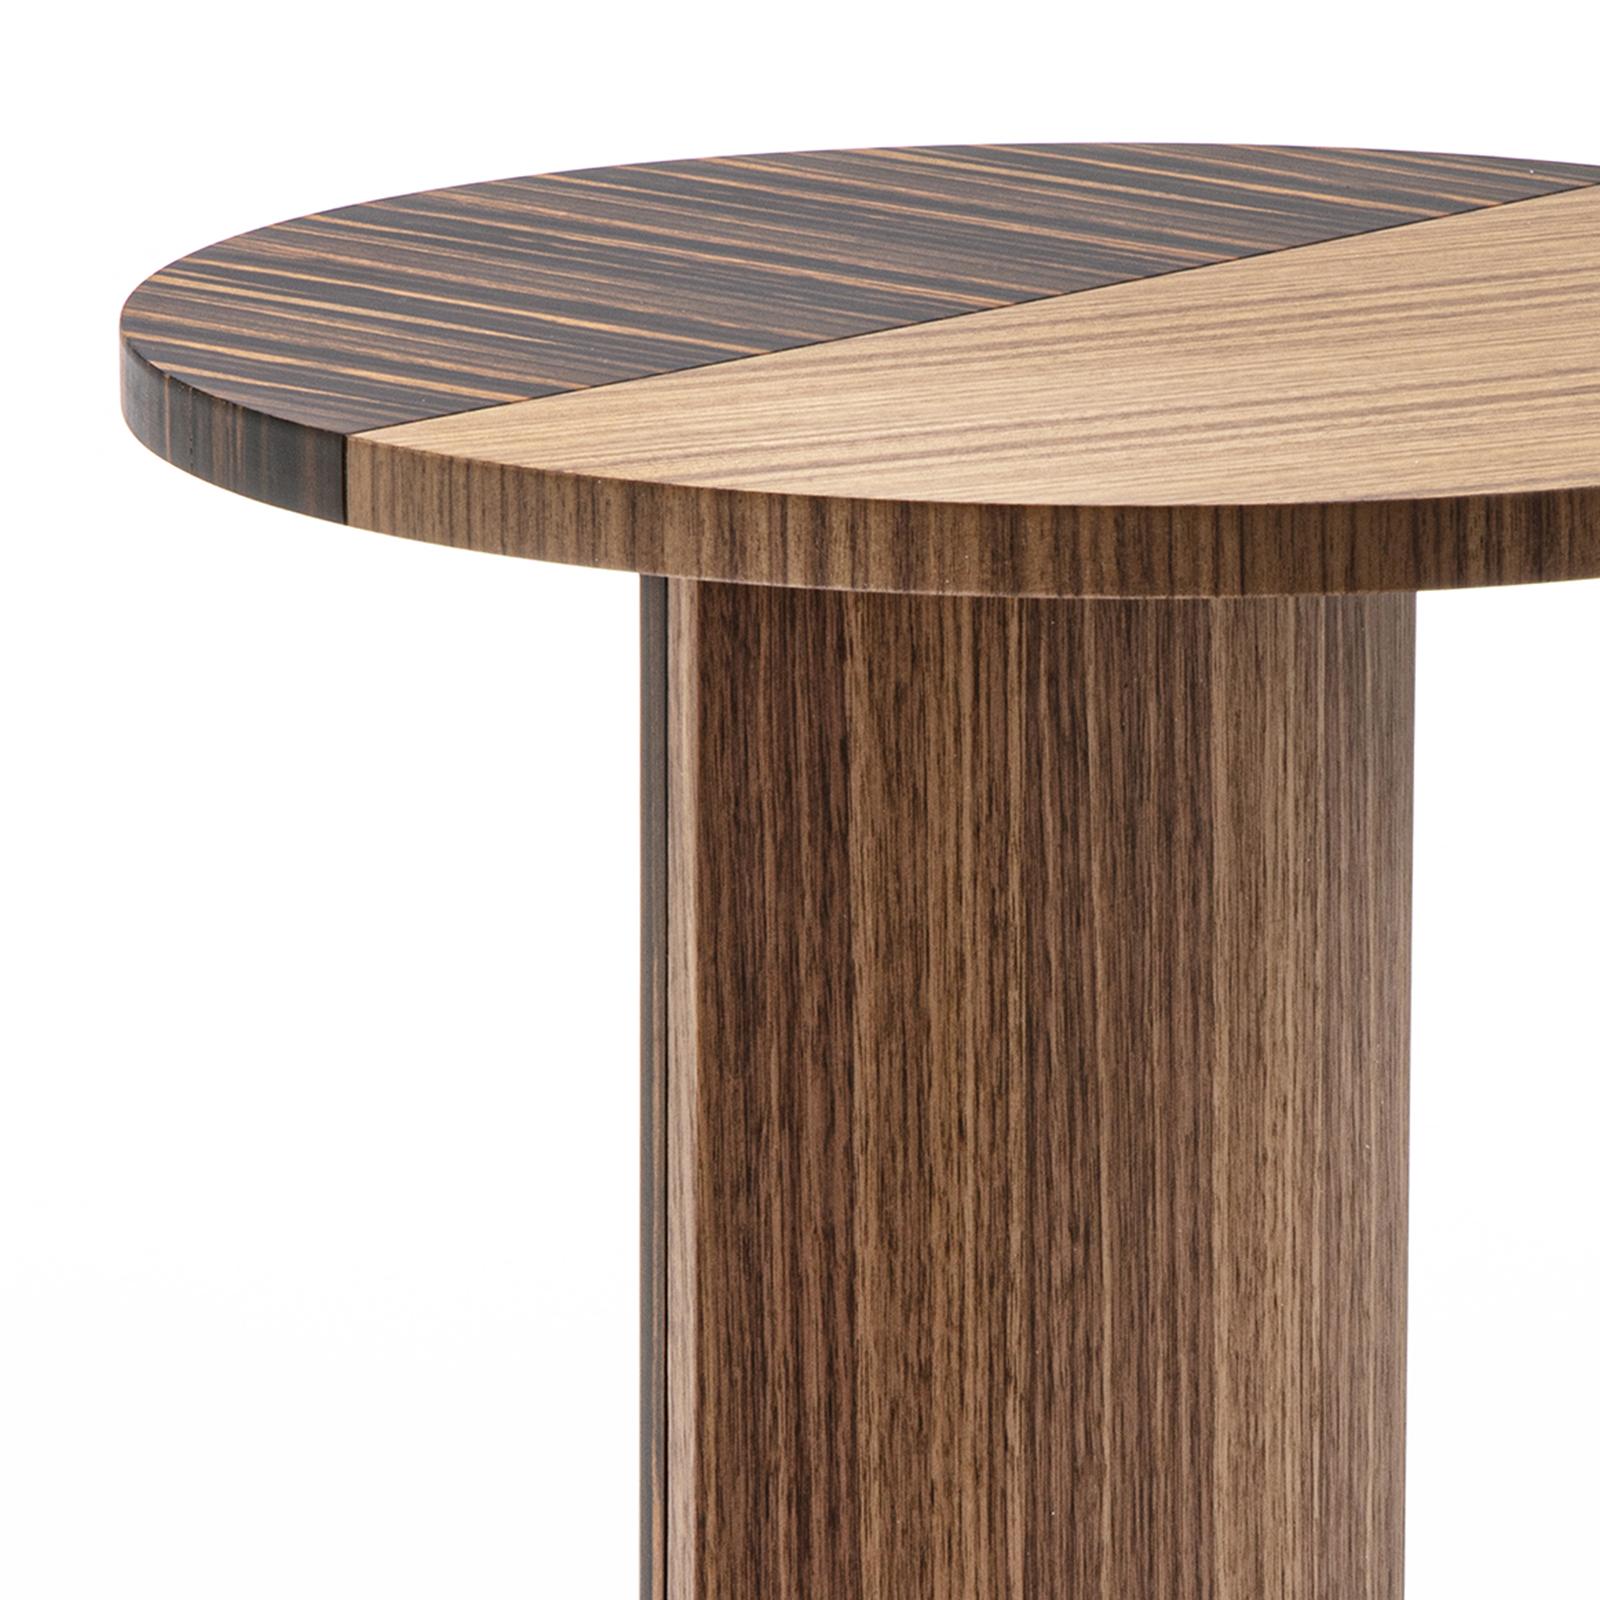 Side table walnut patch medium with top made of 
solid walnut wood and solid amara ebony. Foot in solid 
walnut on white marble base.